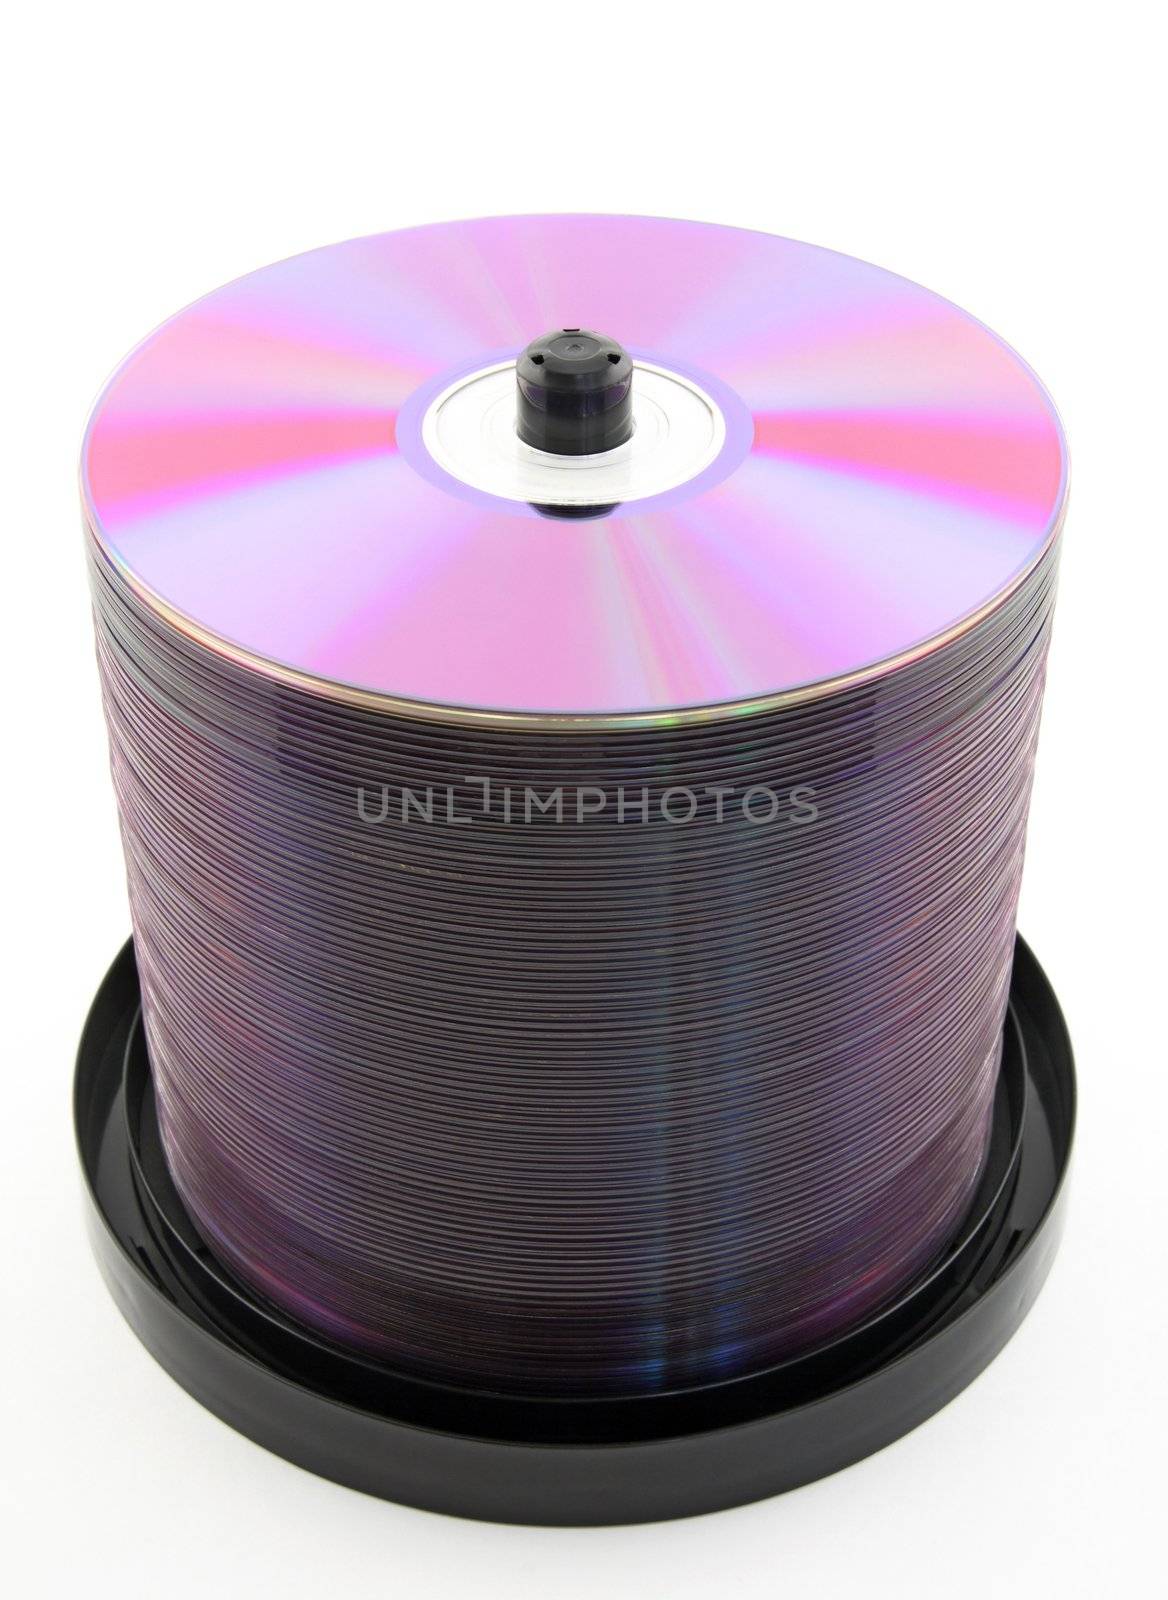 Colorful purple DVDs or CDs on spindle, on white background. No dust.